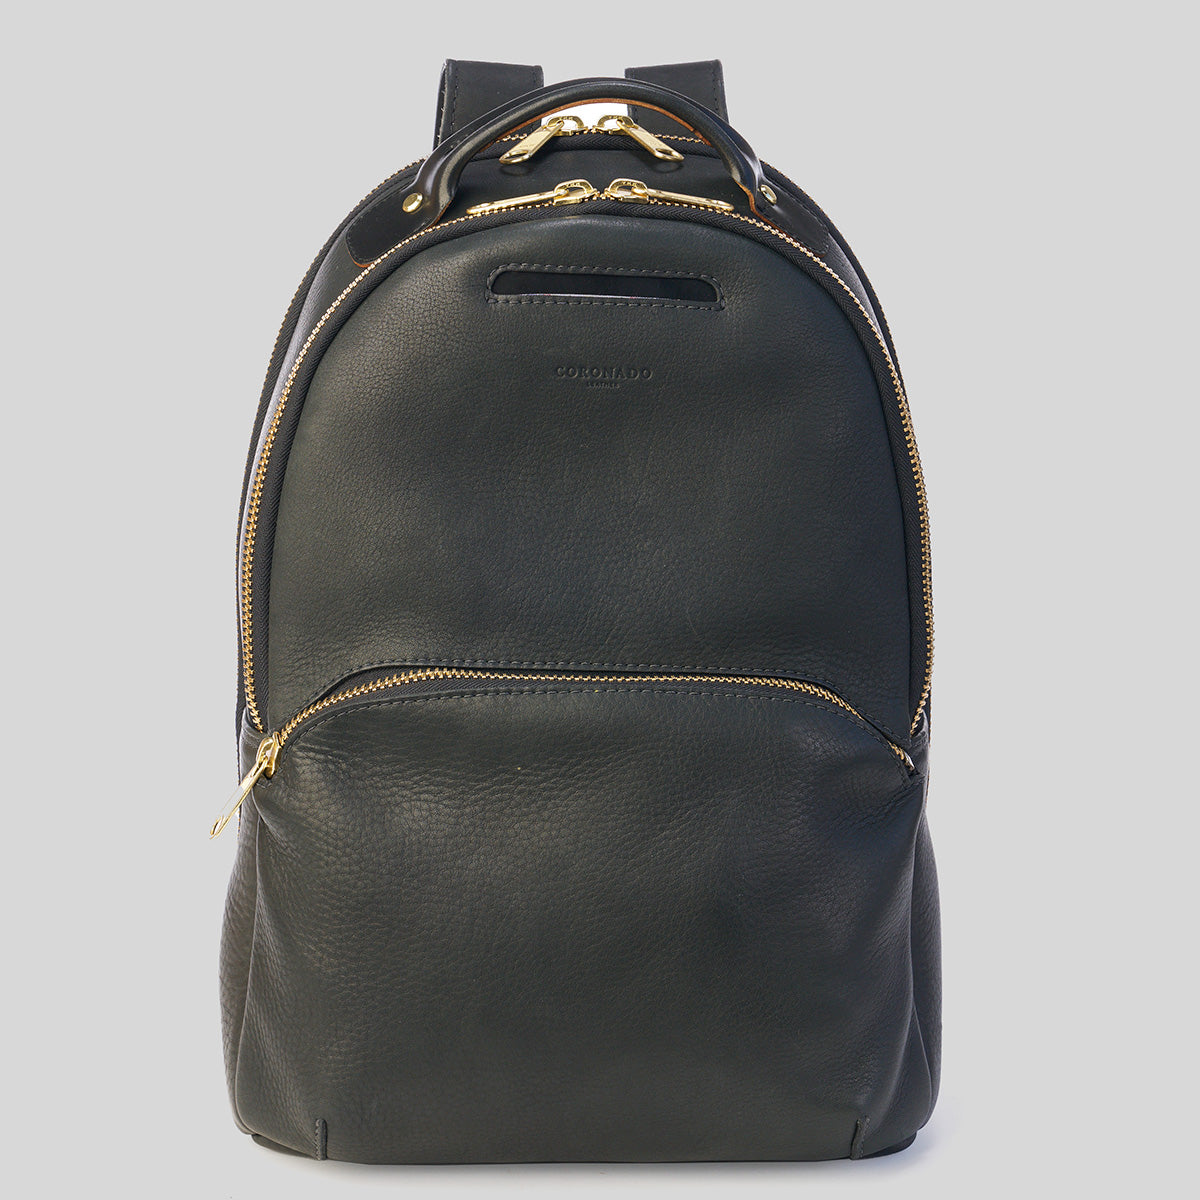 Women's Leather Purse Backpack • Duvall Leather • Made in USA